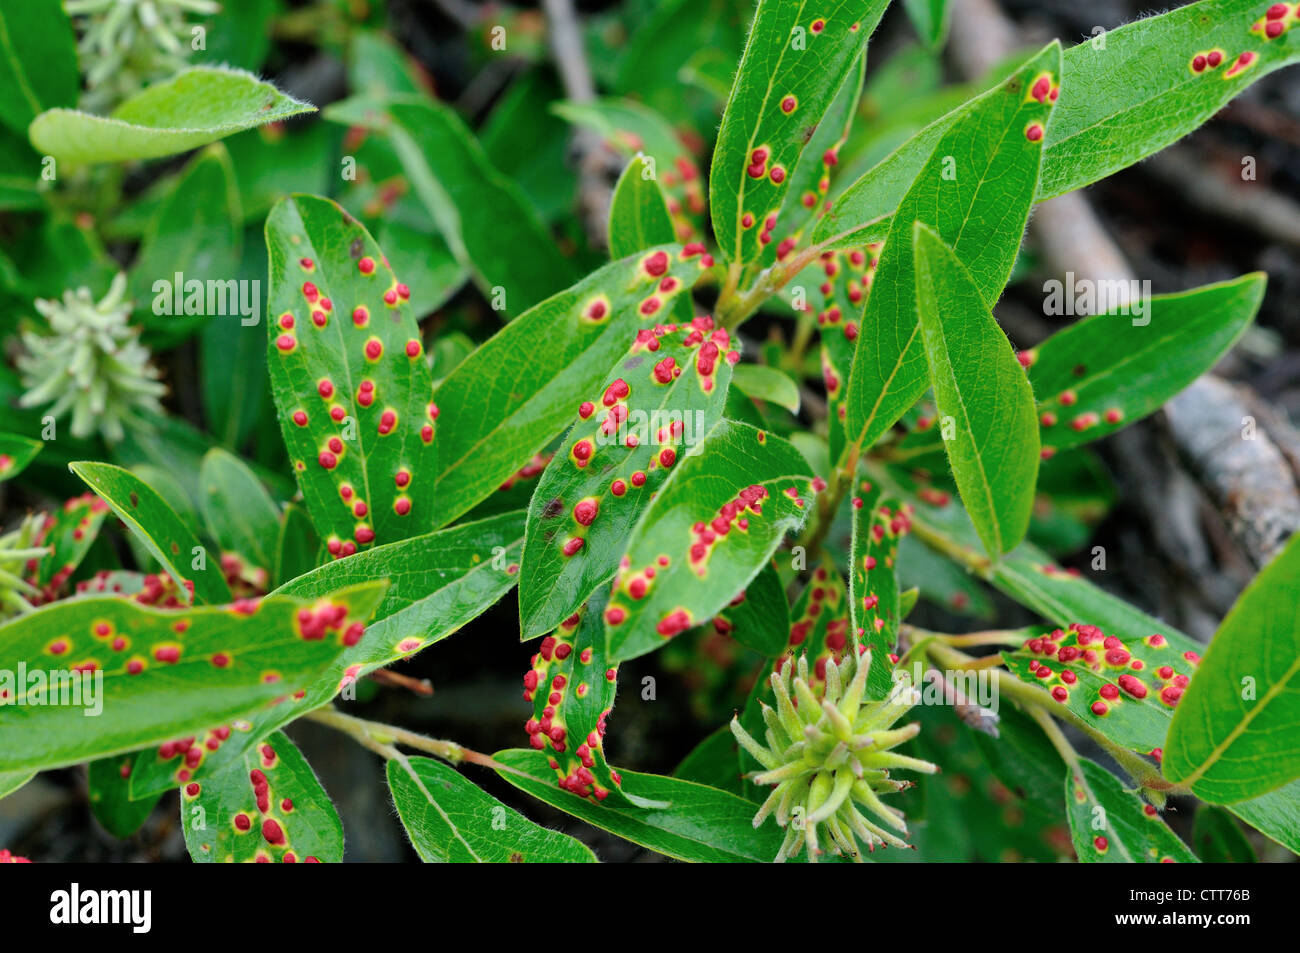 Leaves show red spots infected by disease. Denali National Park and Preserve, Alaska, USA. Stock Photo